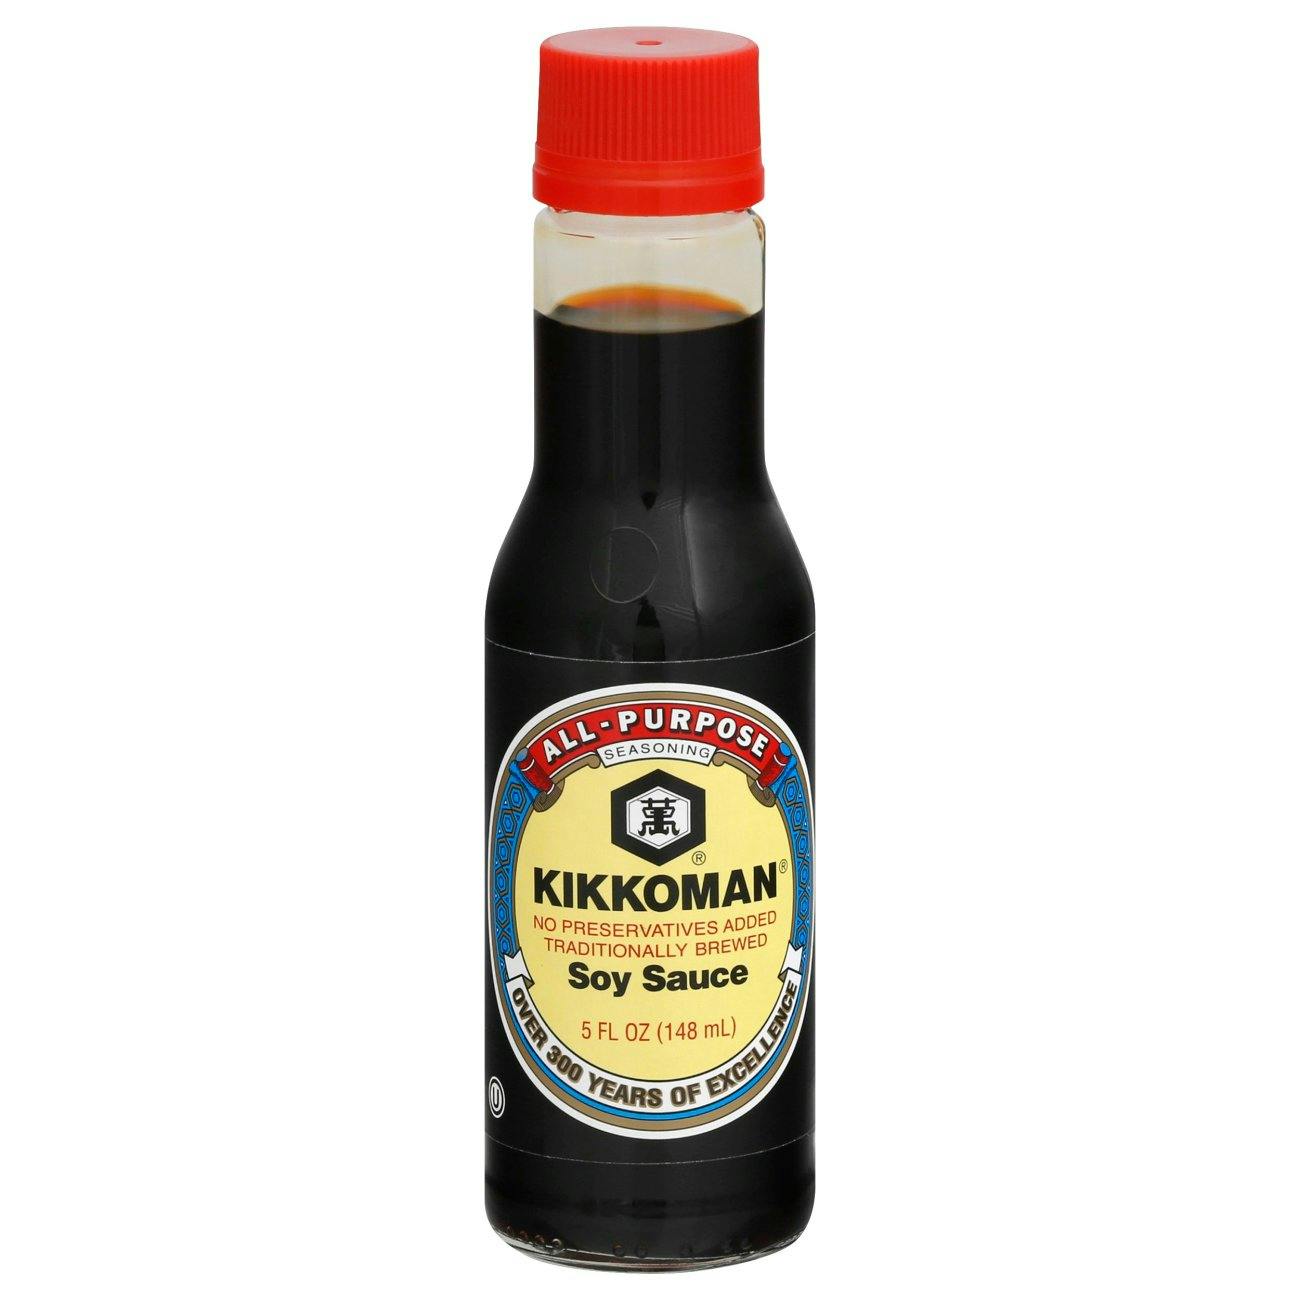 soy sauce to taste